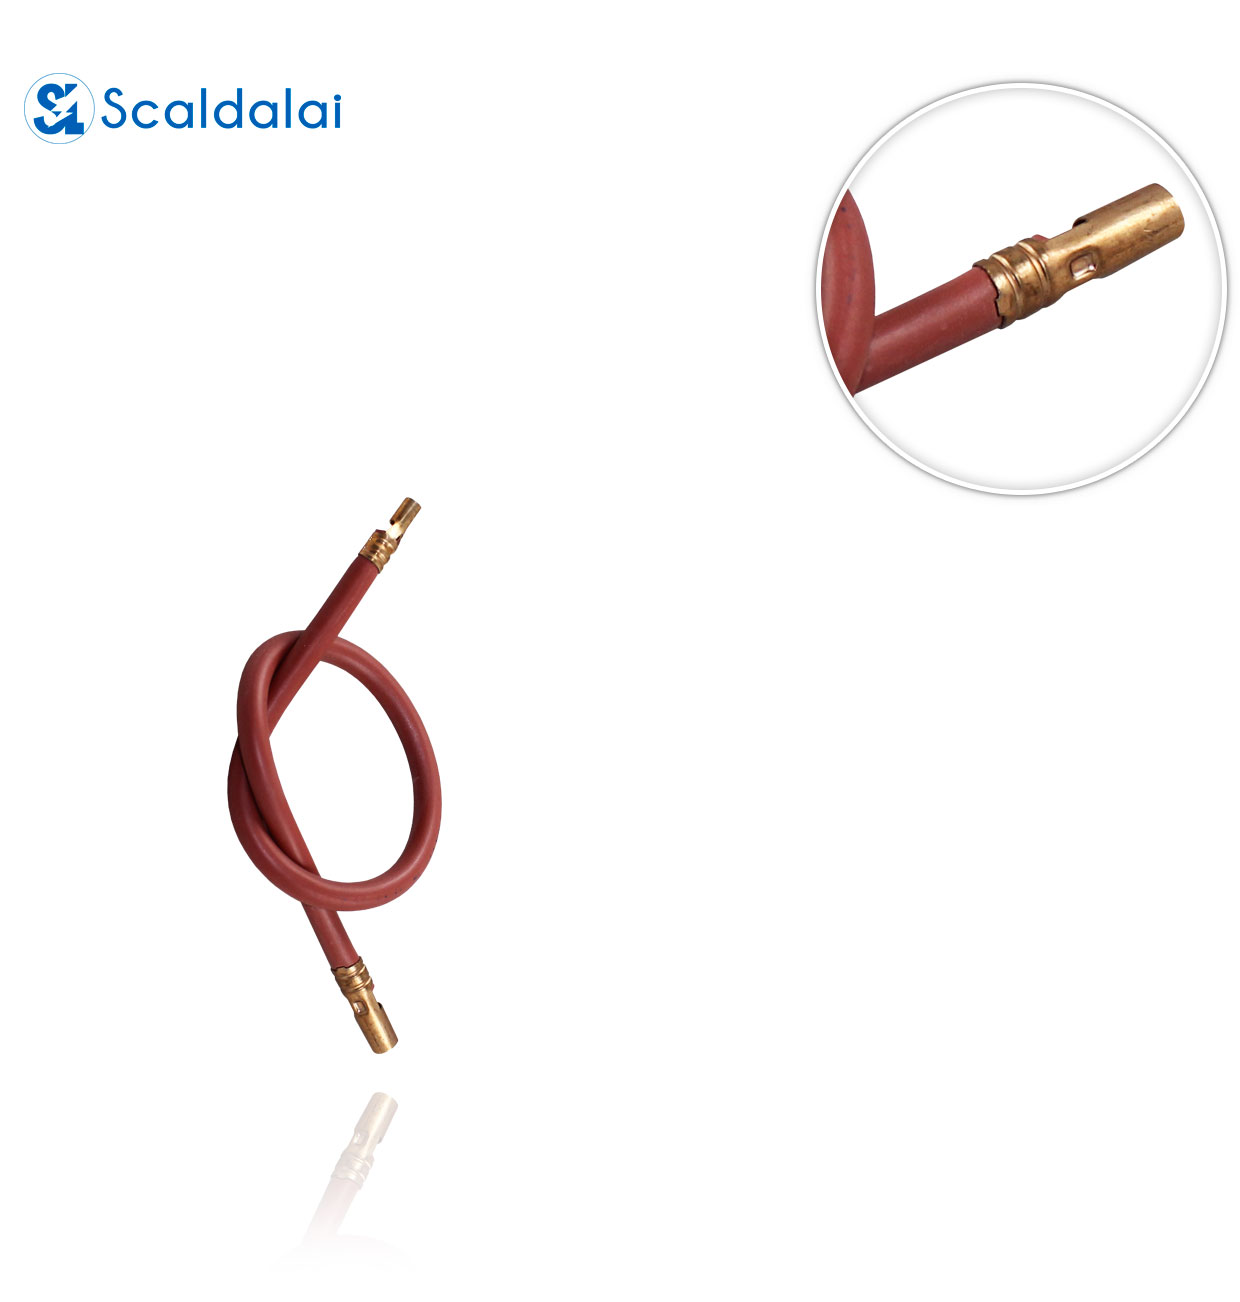 L= 340mm. F4/F6 ELECTRODE CABLE FOR 21020/C SCALDALAI